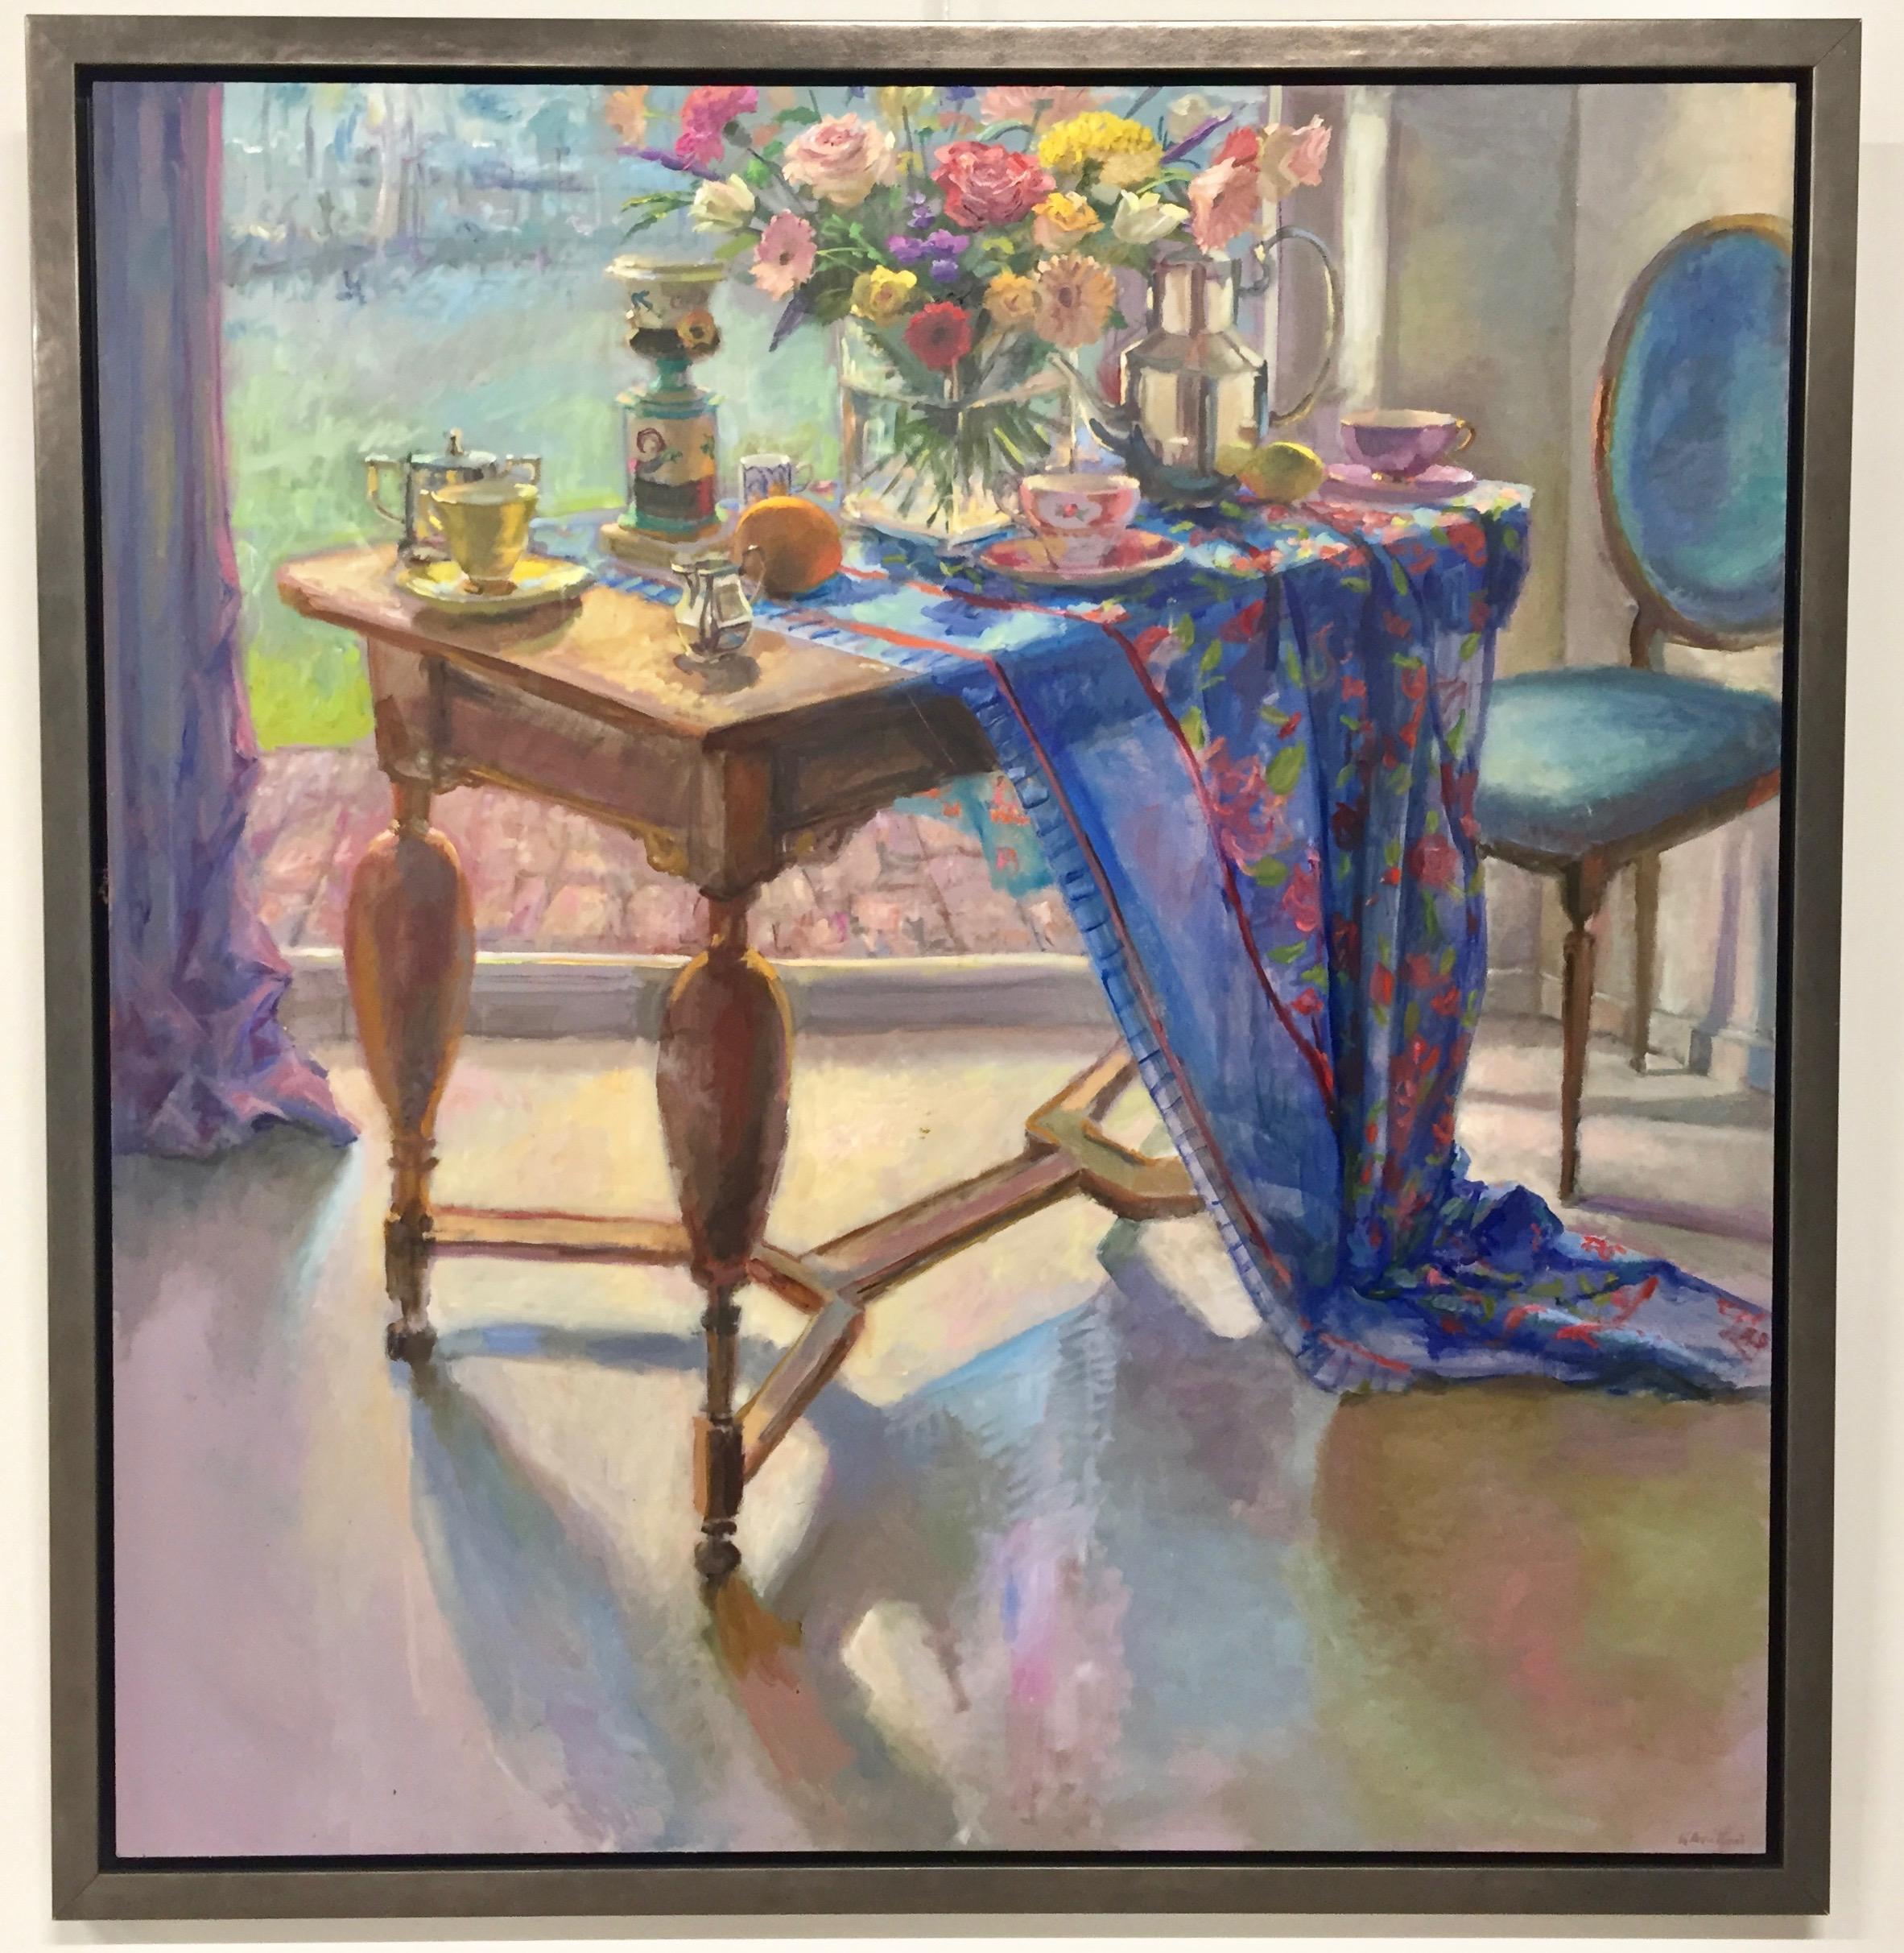 painting of table